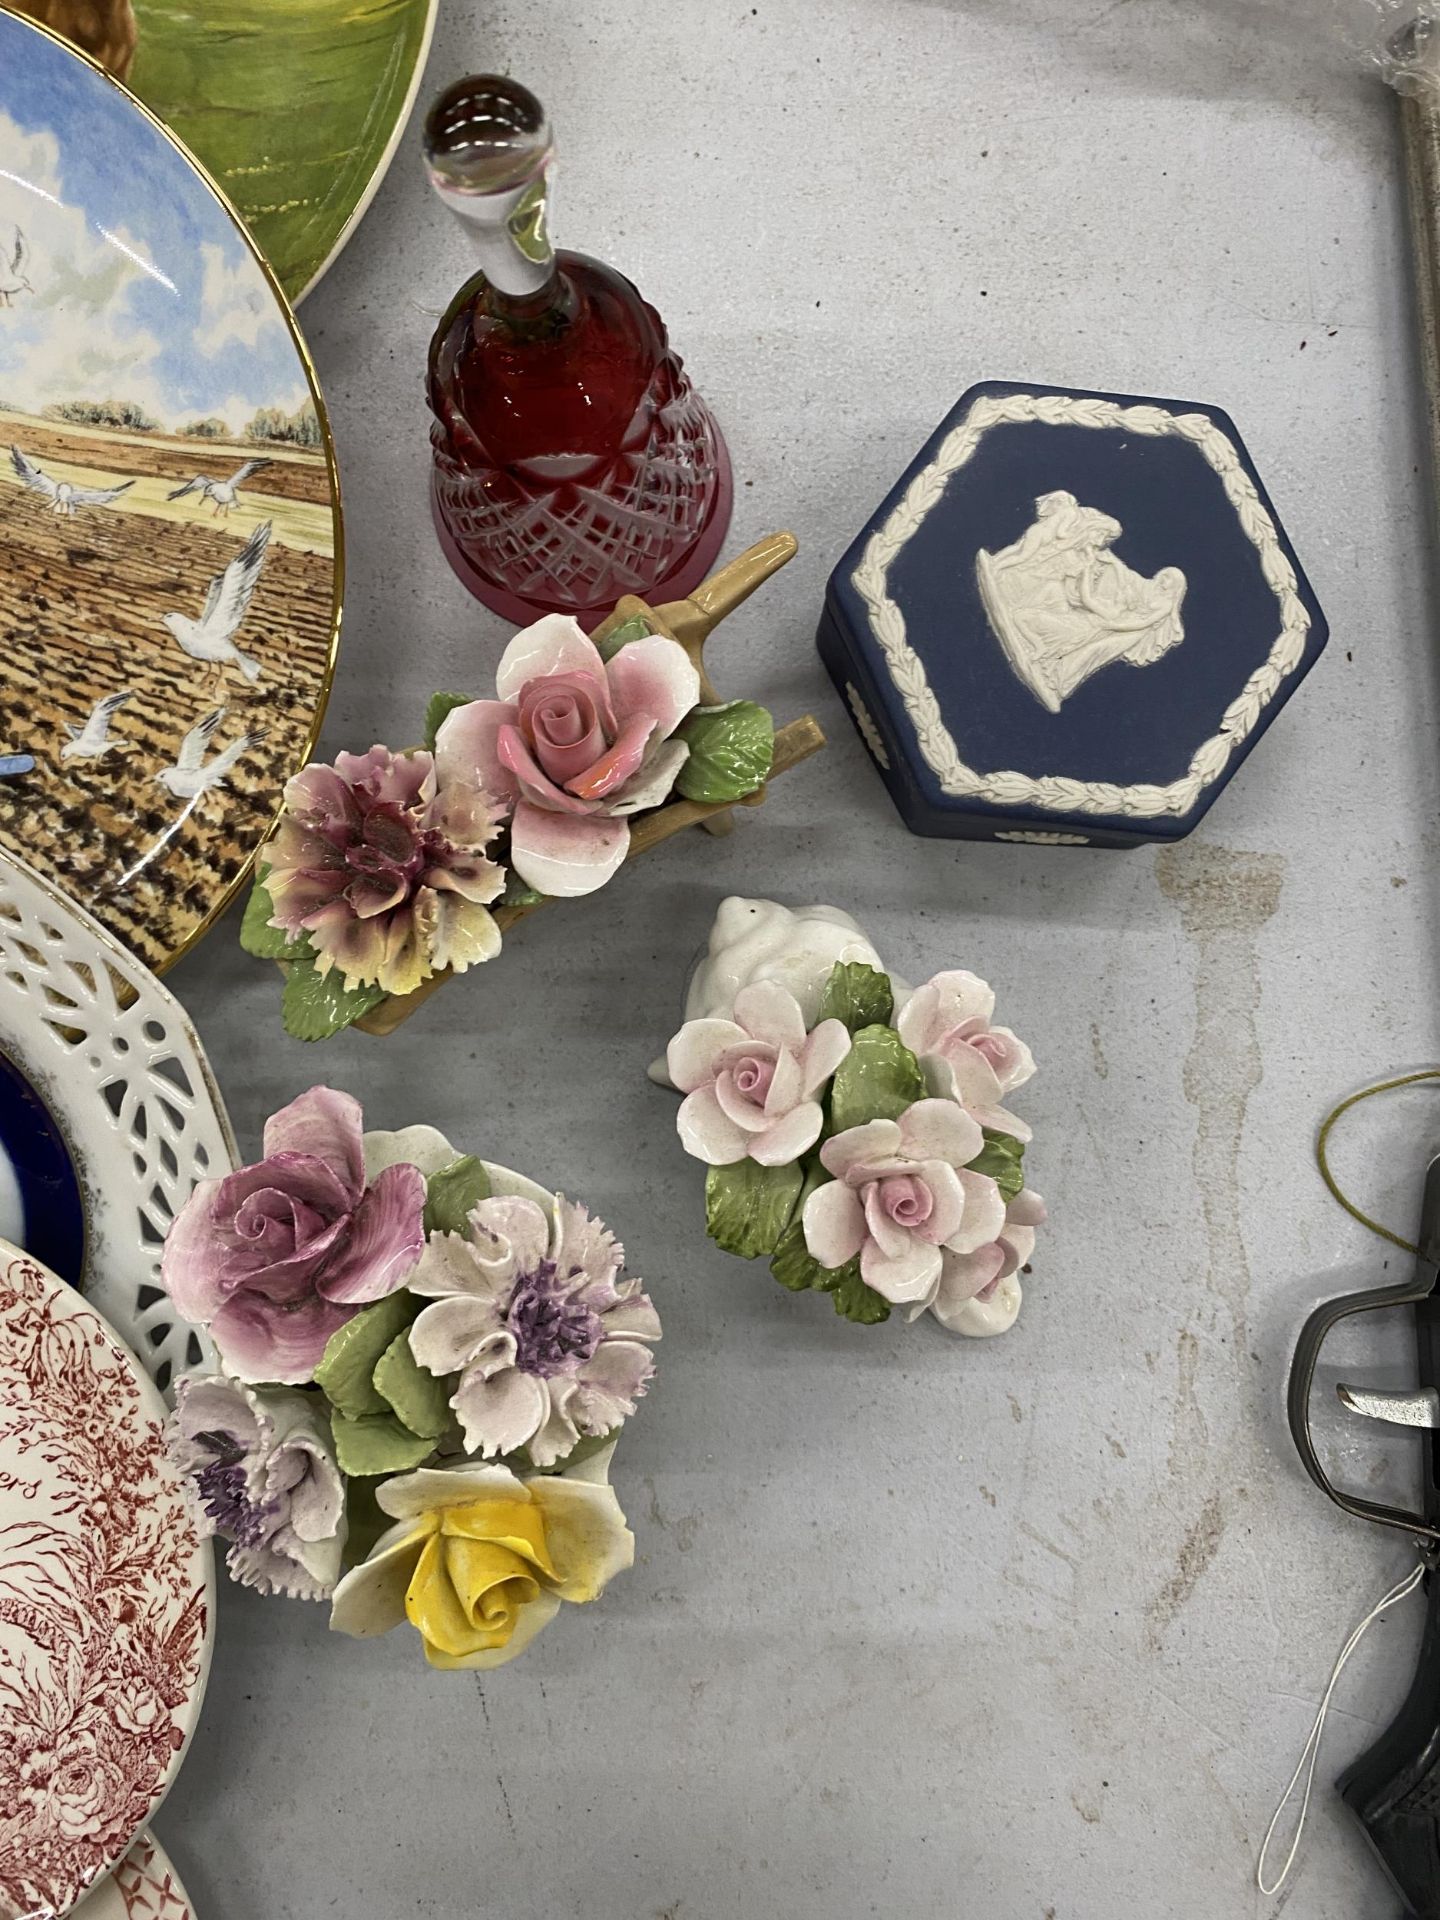 A QUANTITY OF CABINET PLATES, FLOWER POSIES, A WEDGWOOD JASPERWARE TRINKET BOX AND A CRANBERRY GLASS - Image 4 of 5